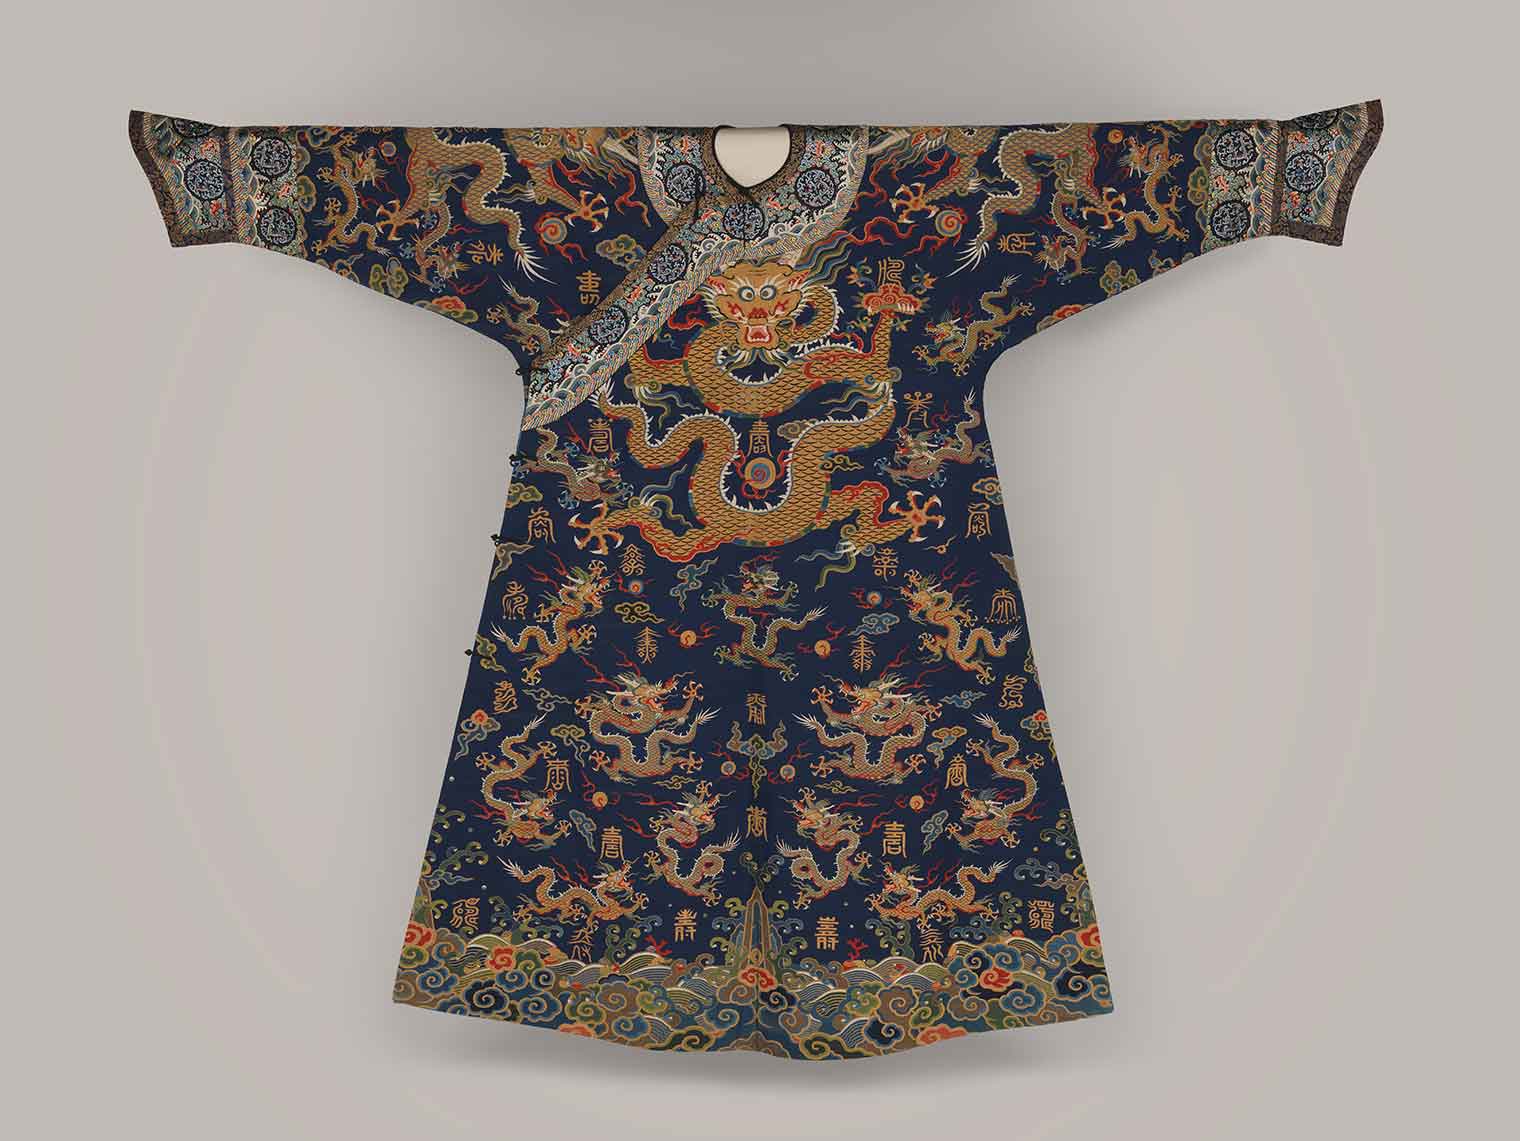 A robe with a large dragon design and other symbols throughout.